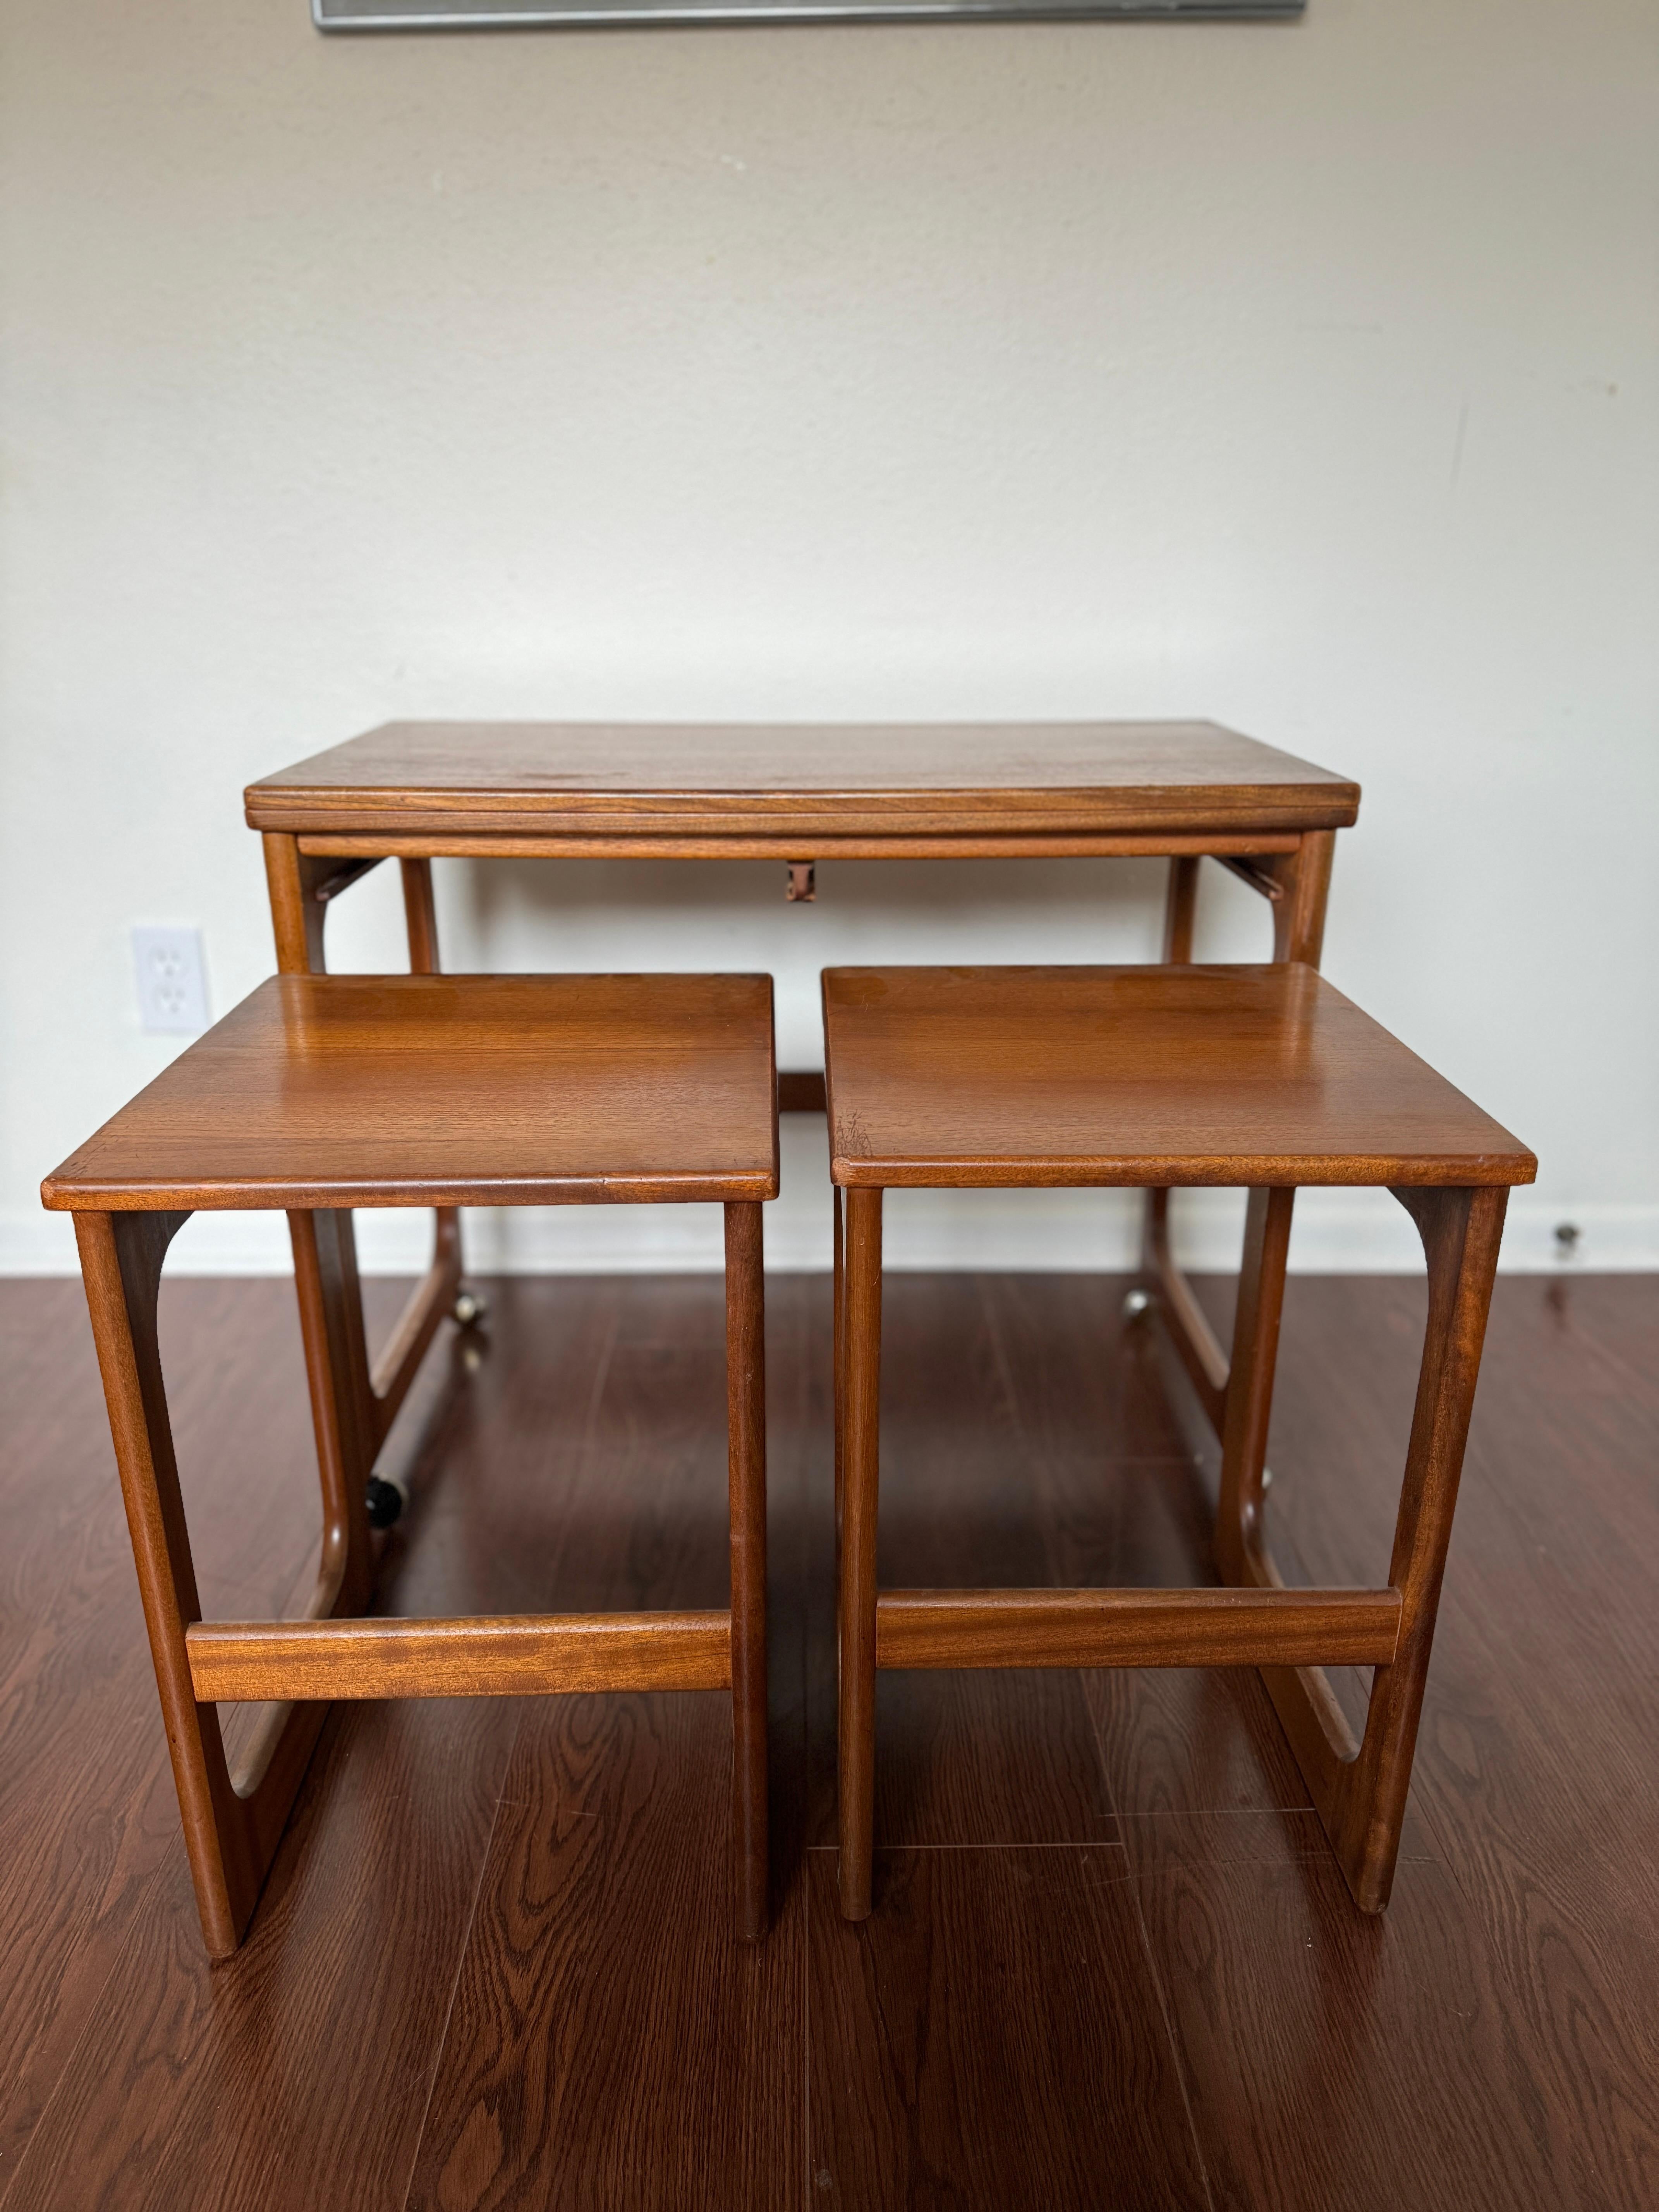 European Multifunctional mid century extendable teak table by McIntosh, circa 1960s For Sale